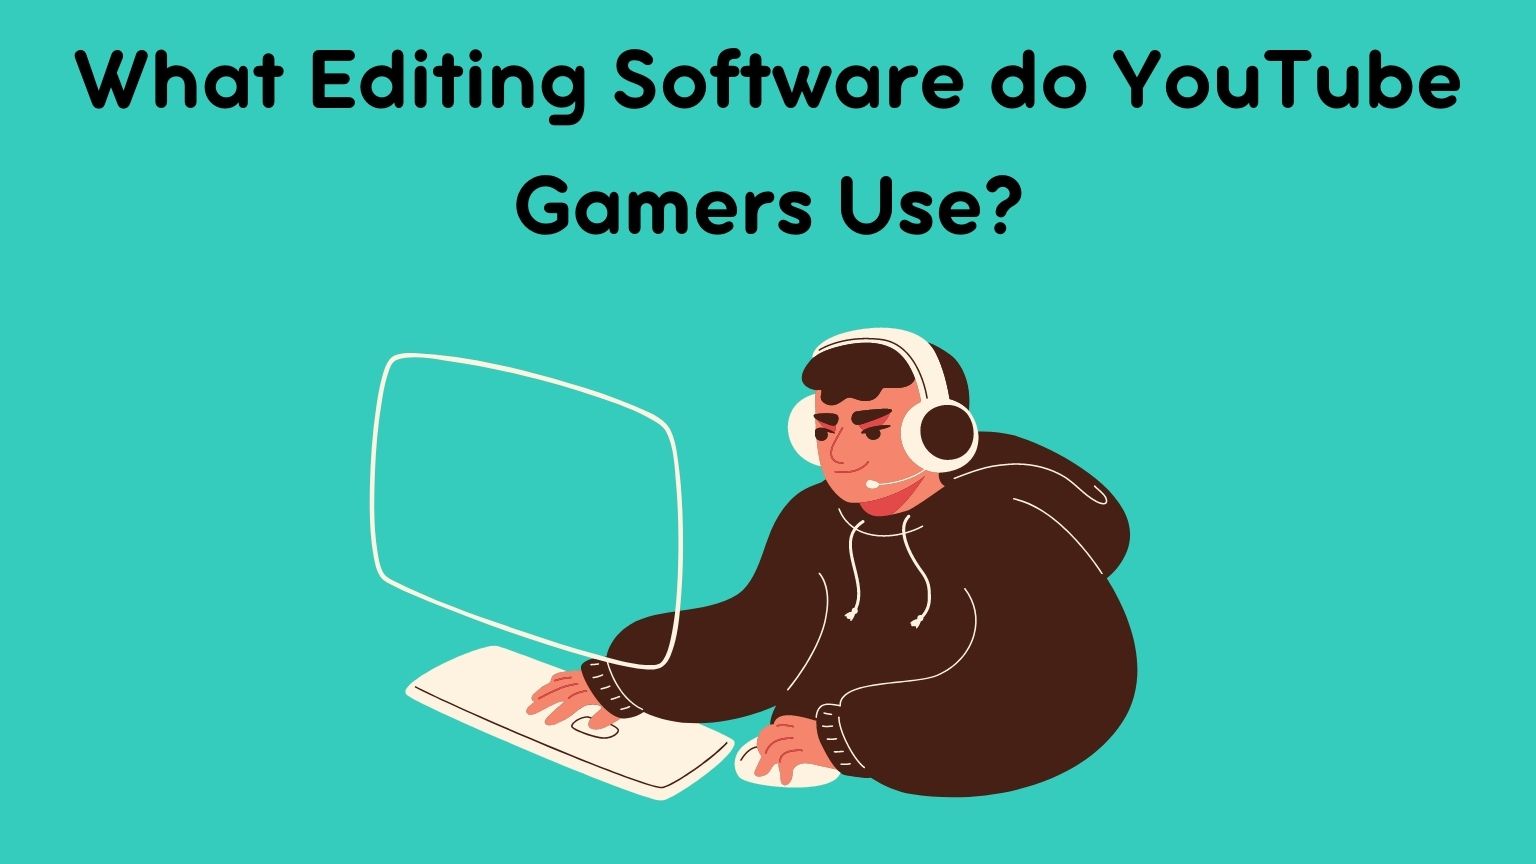 What video editing software do YouTube gamers use